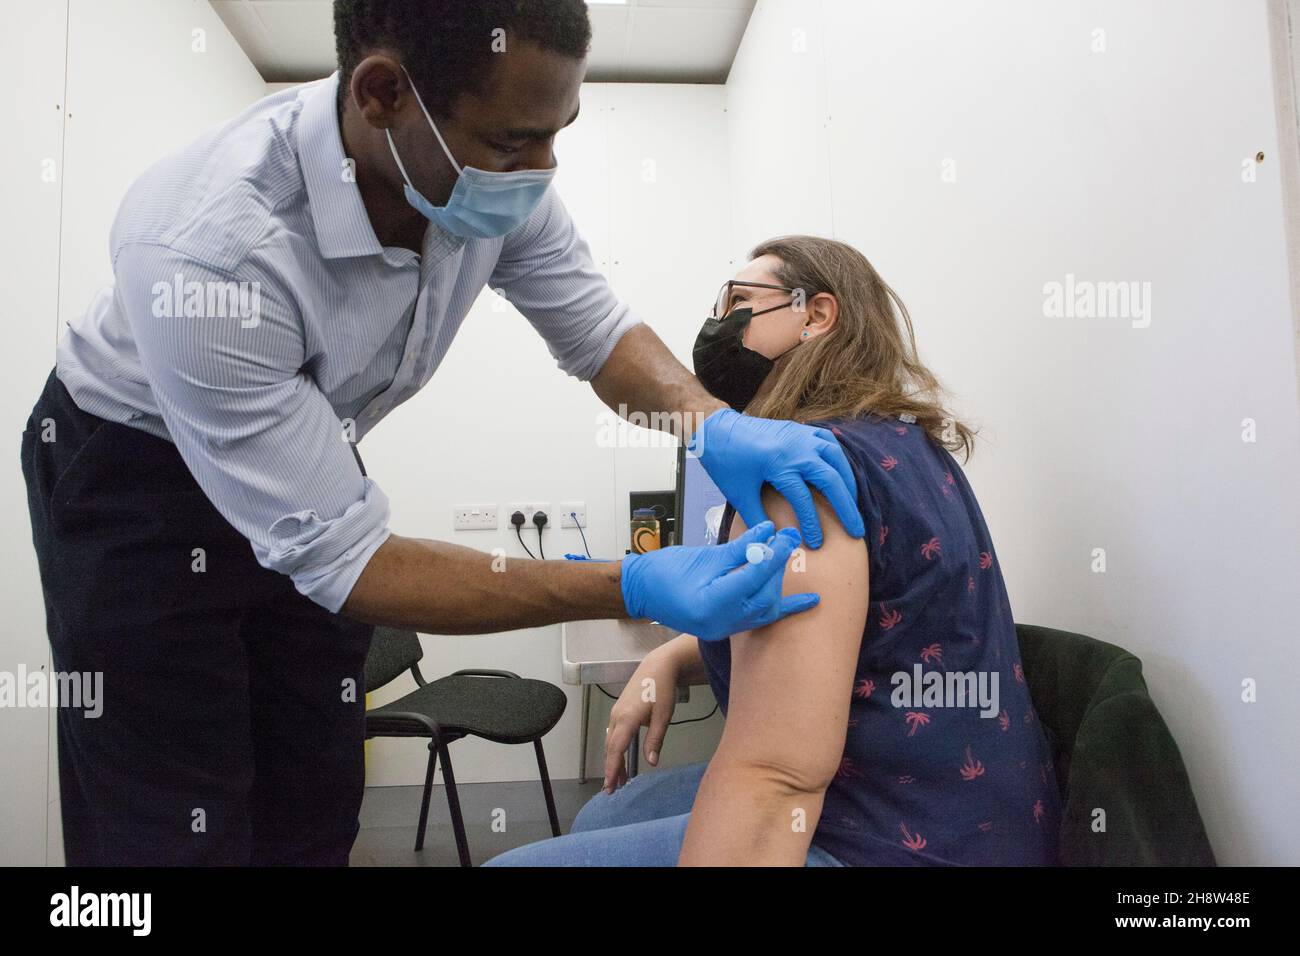 London, UK, 2 December 2021: Helen Eastman, 42, receives her Pfizer booster jab at Pearl Chemists pop-up vaccination centre in Tooting, south London. The government have promised to offer all adults a third vaccination dose by the end of January 2022 in the face of fears that the omicron varant could spread rapidly once it starts community transmission in the UK. Anna Watson/Alamy Live News Stock Photo